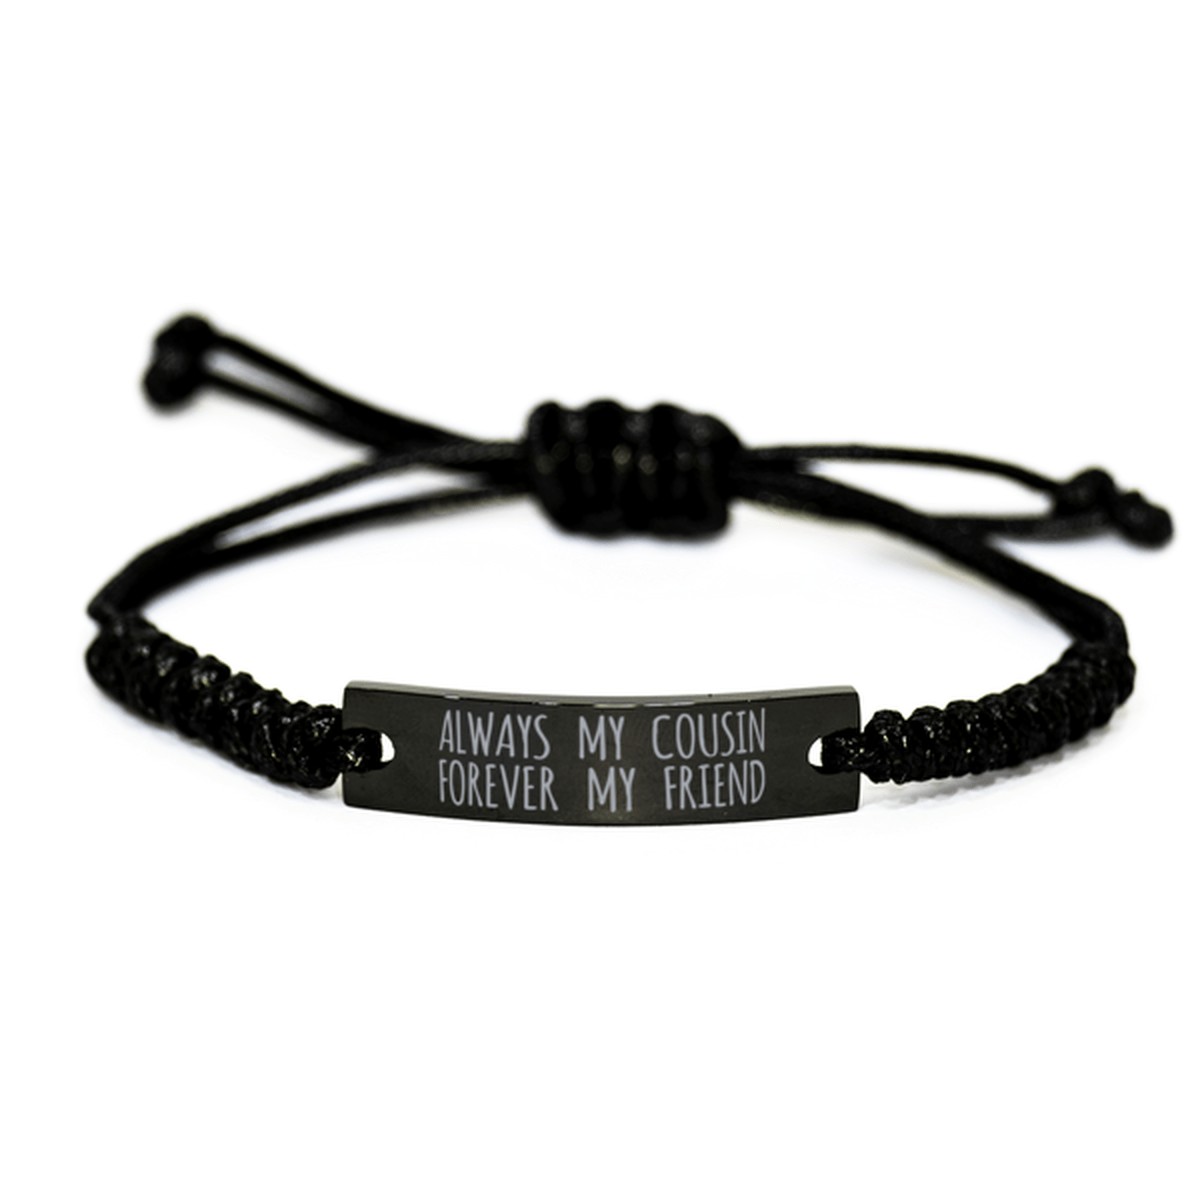 Inspirational Cousin Black Rope Bracelet, Always My Cousin Forever My Friend, Best Birthday Gifts For Family